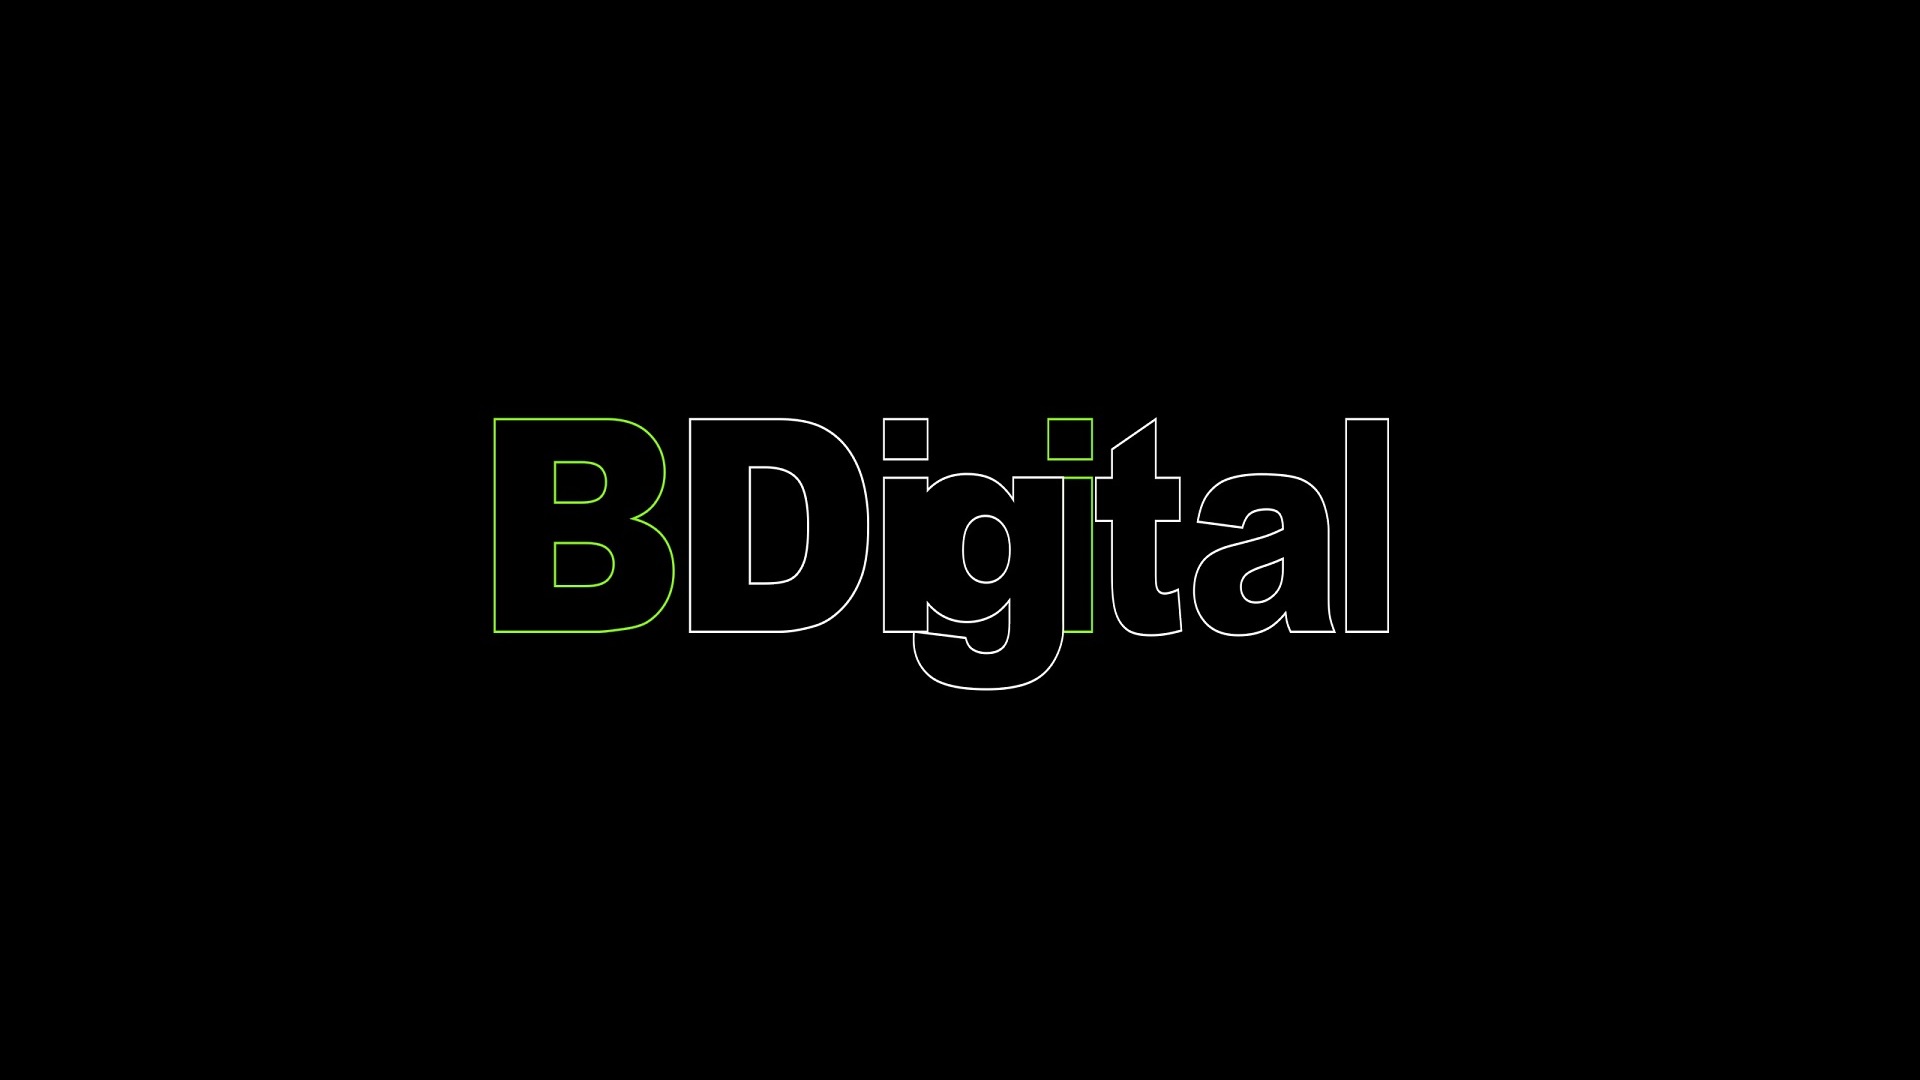 BDigital Background - for use on devices